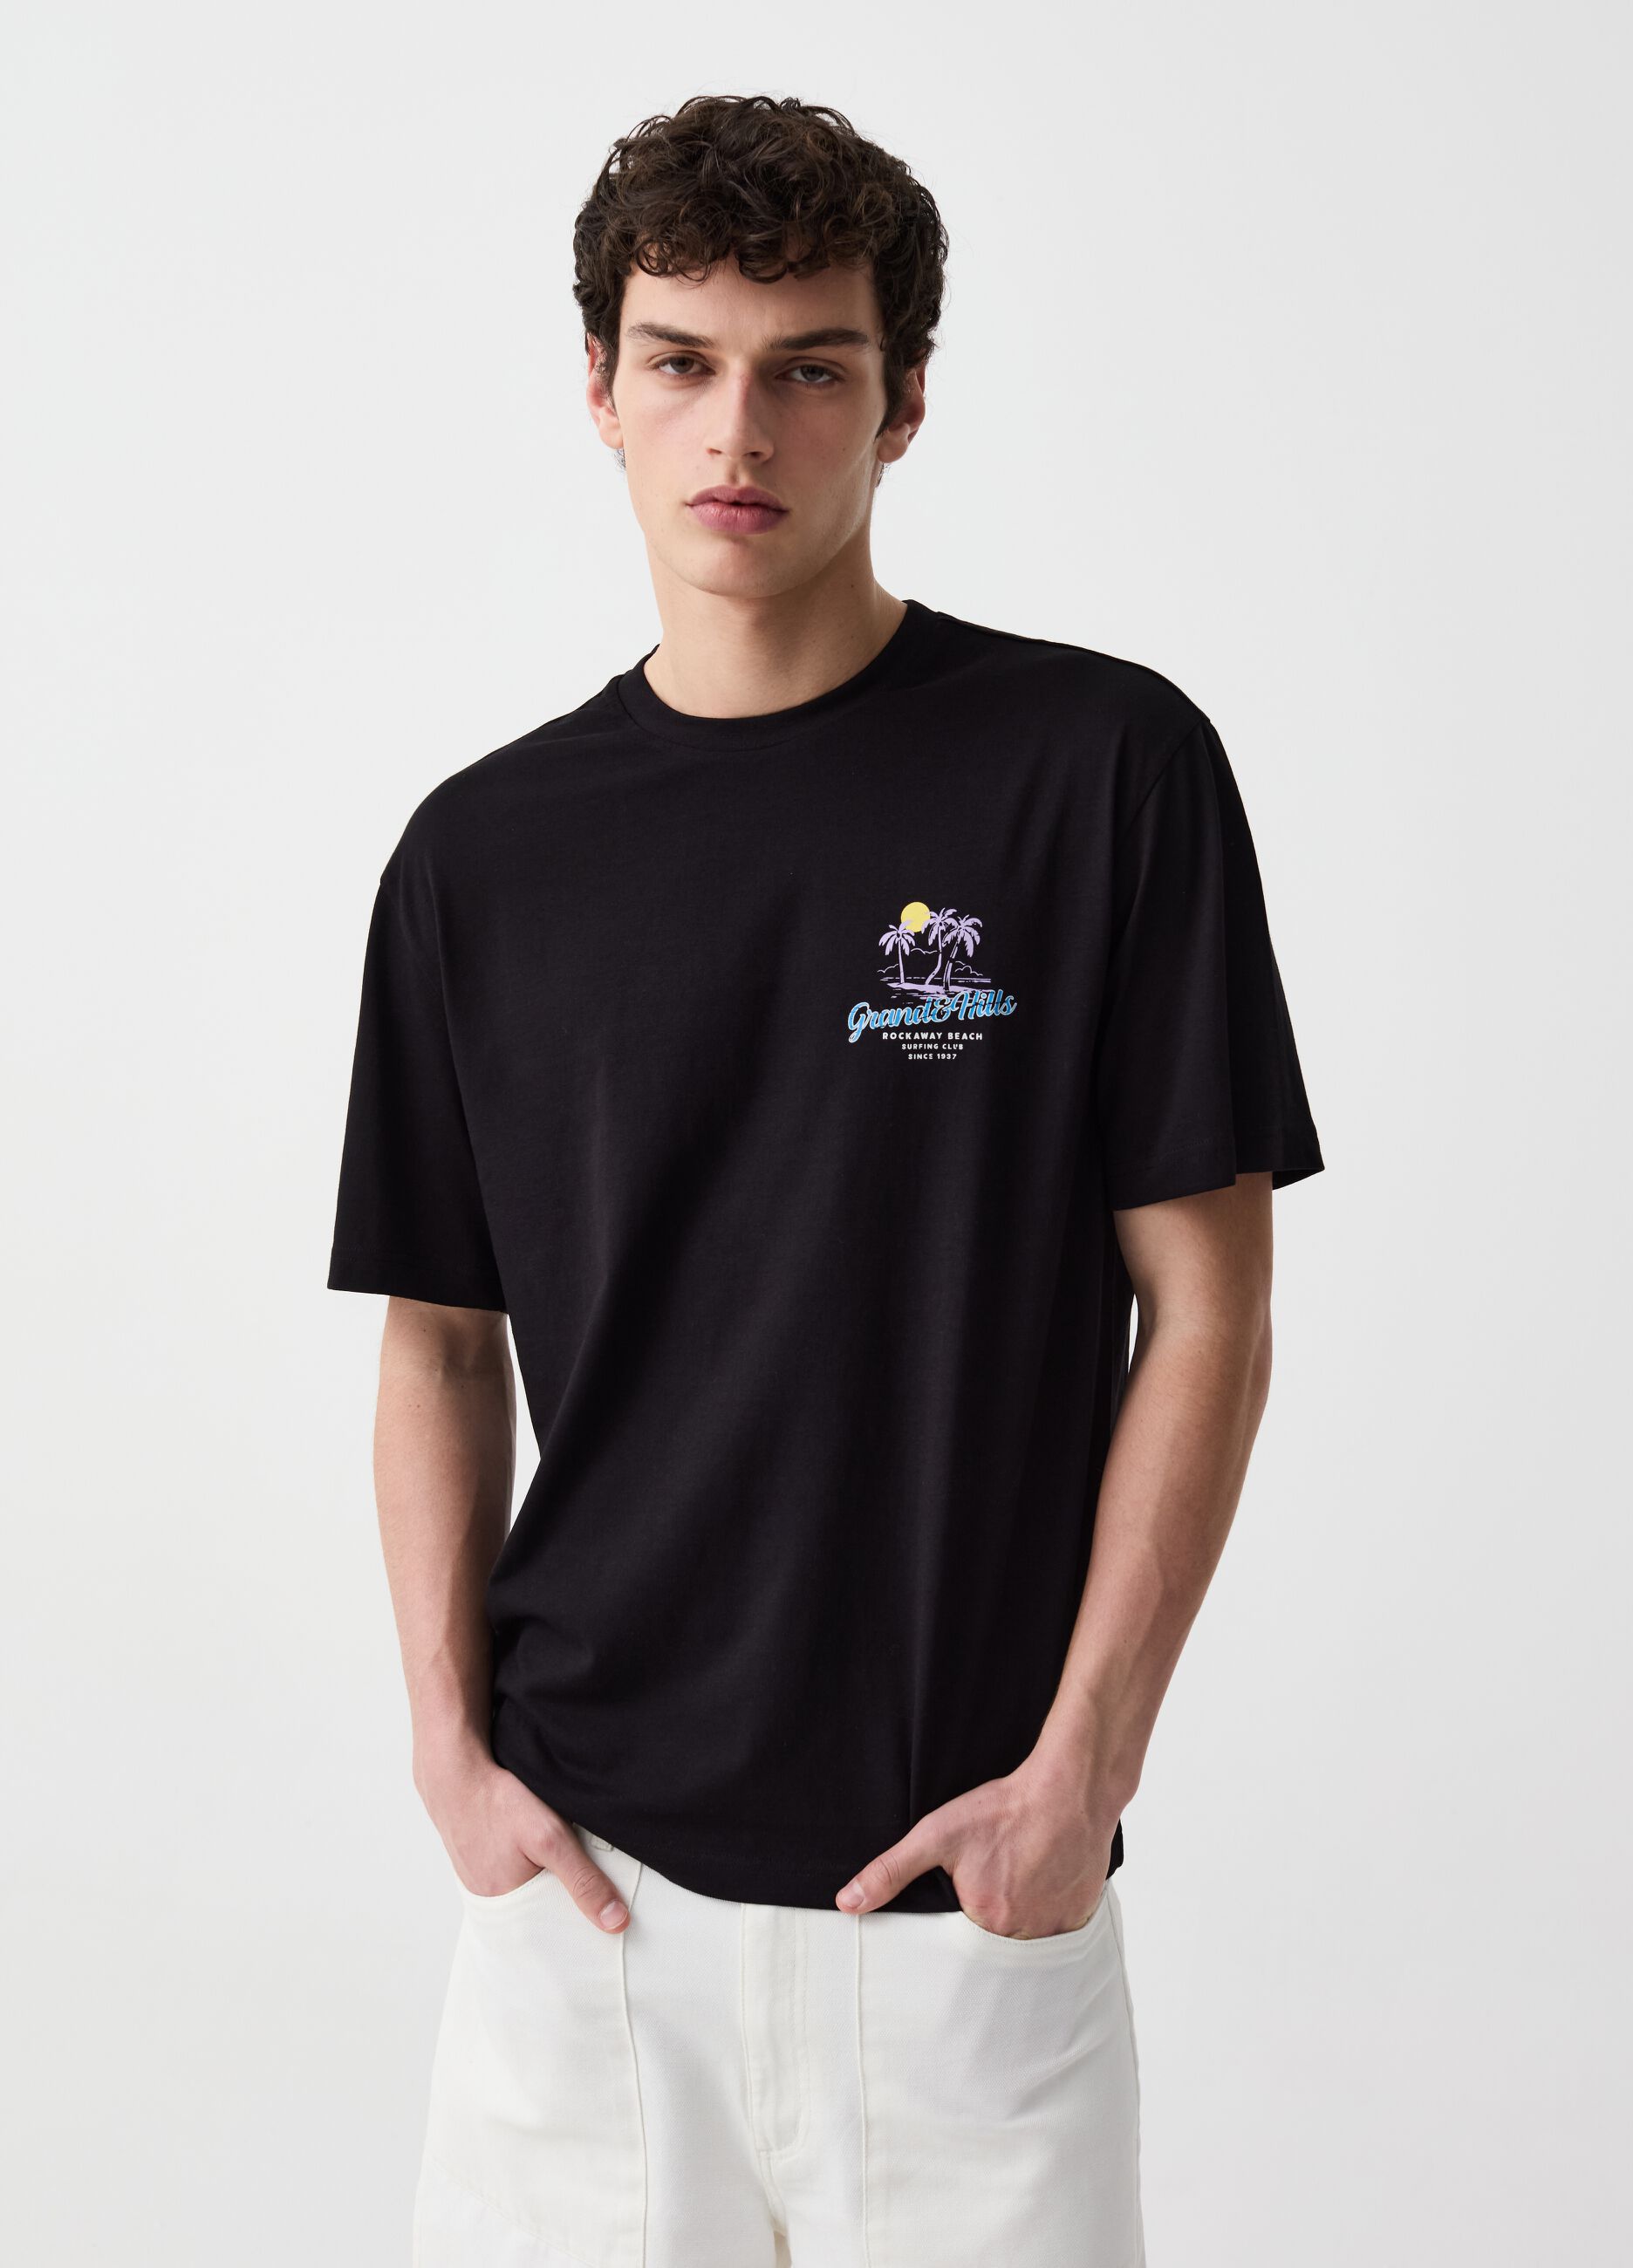 T-shirt with Rockway Beach Surfing Club print